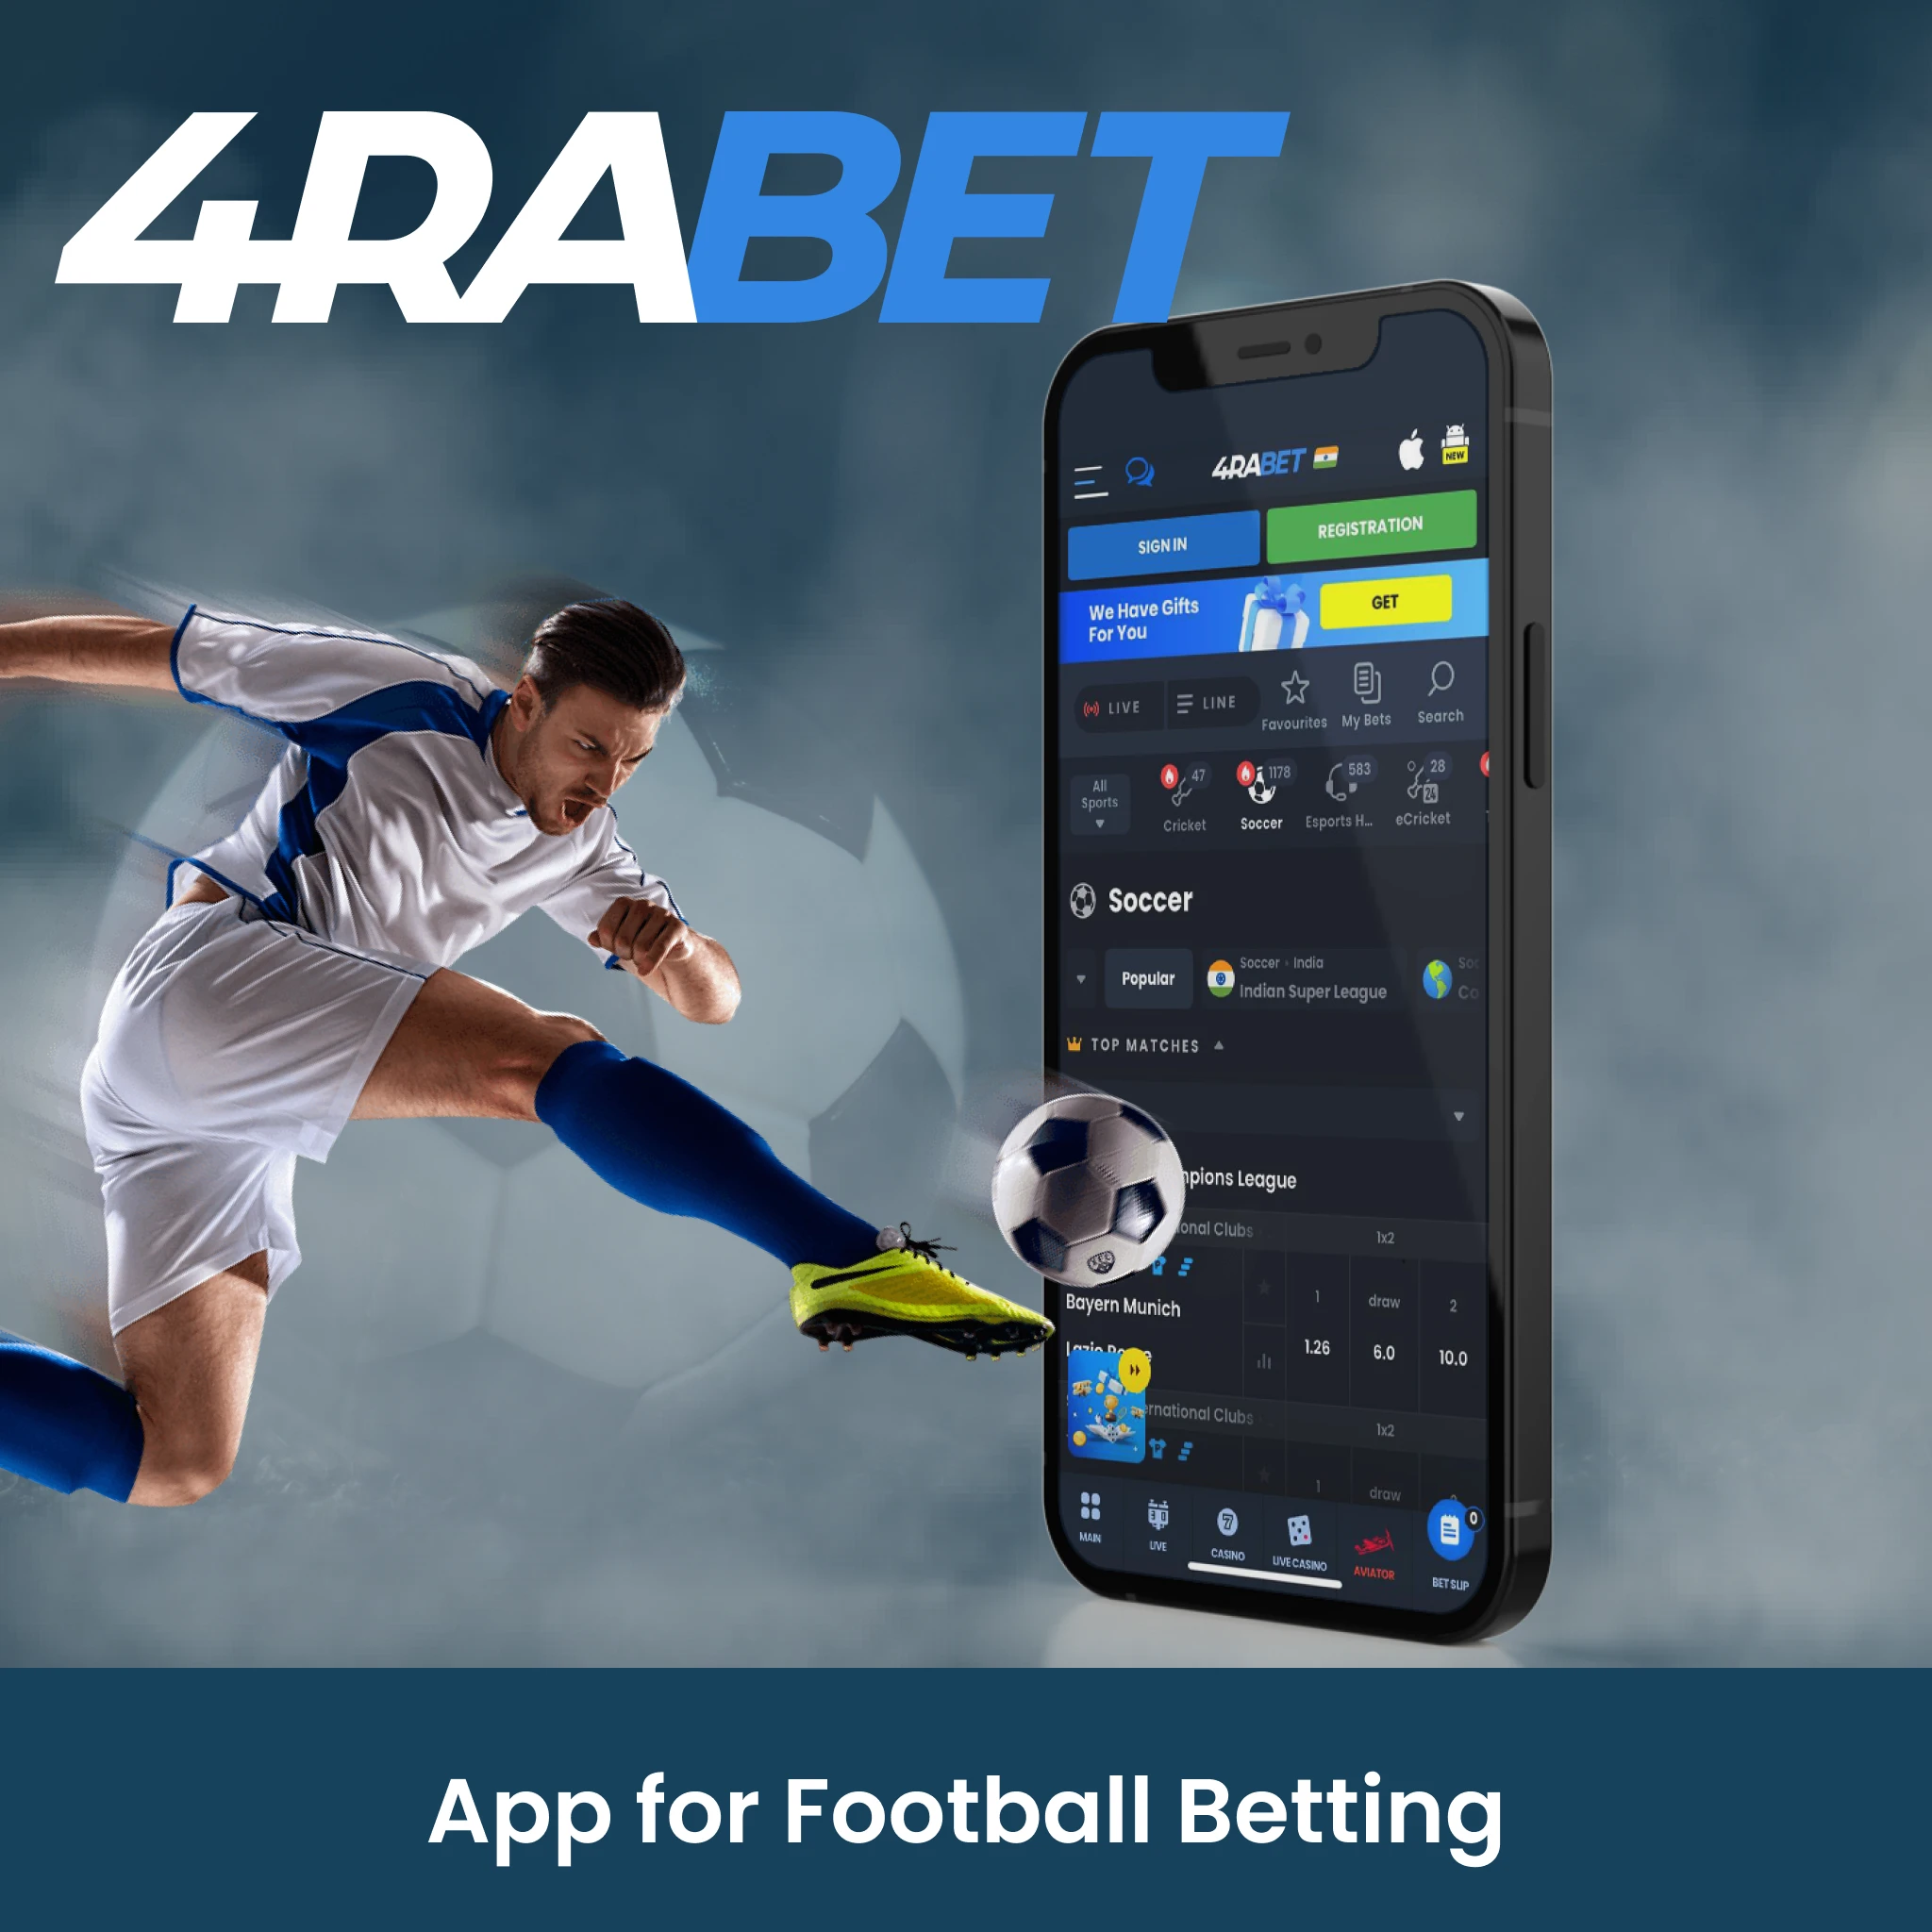 4rabet app offers a diverse array of features and options tailored to Indian players.